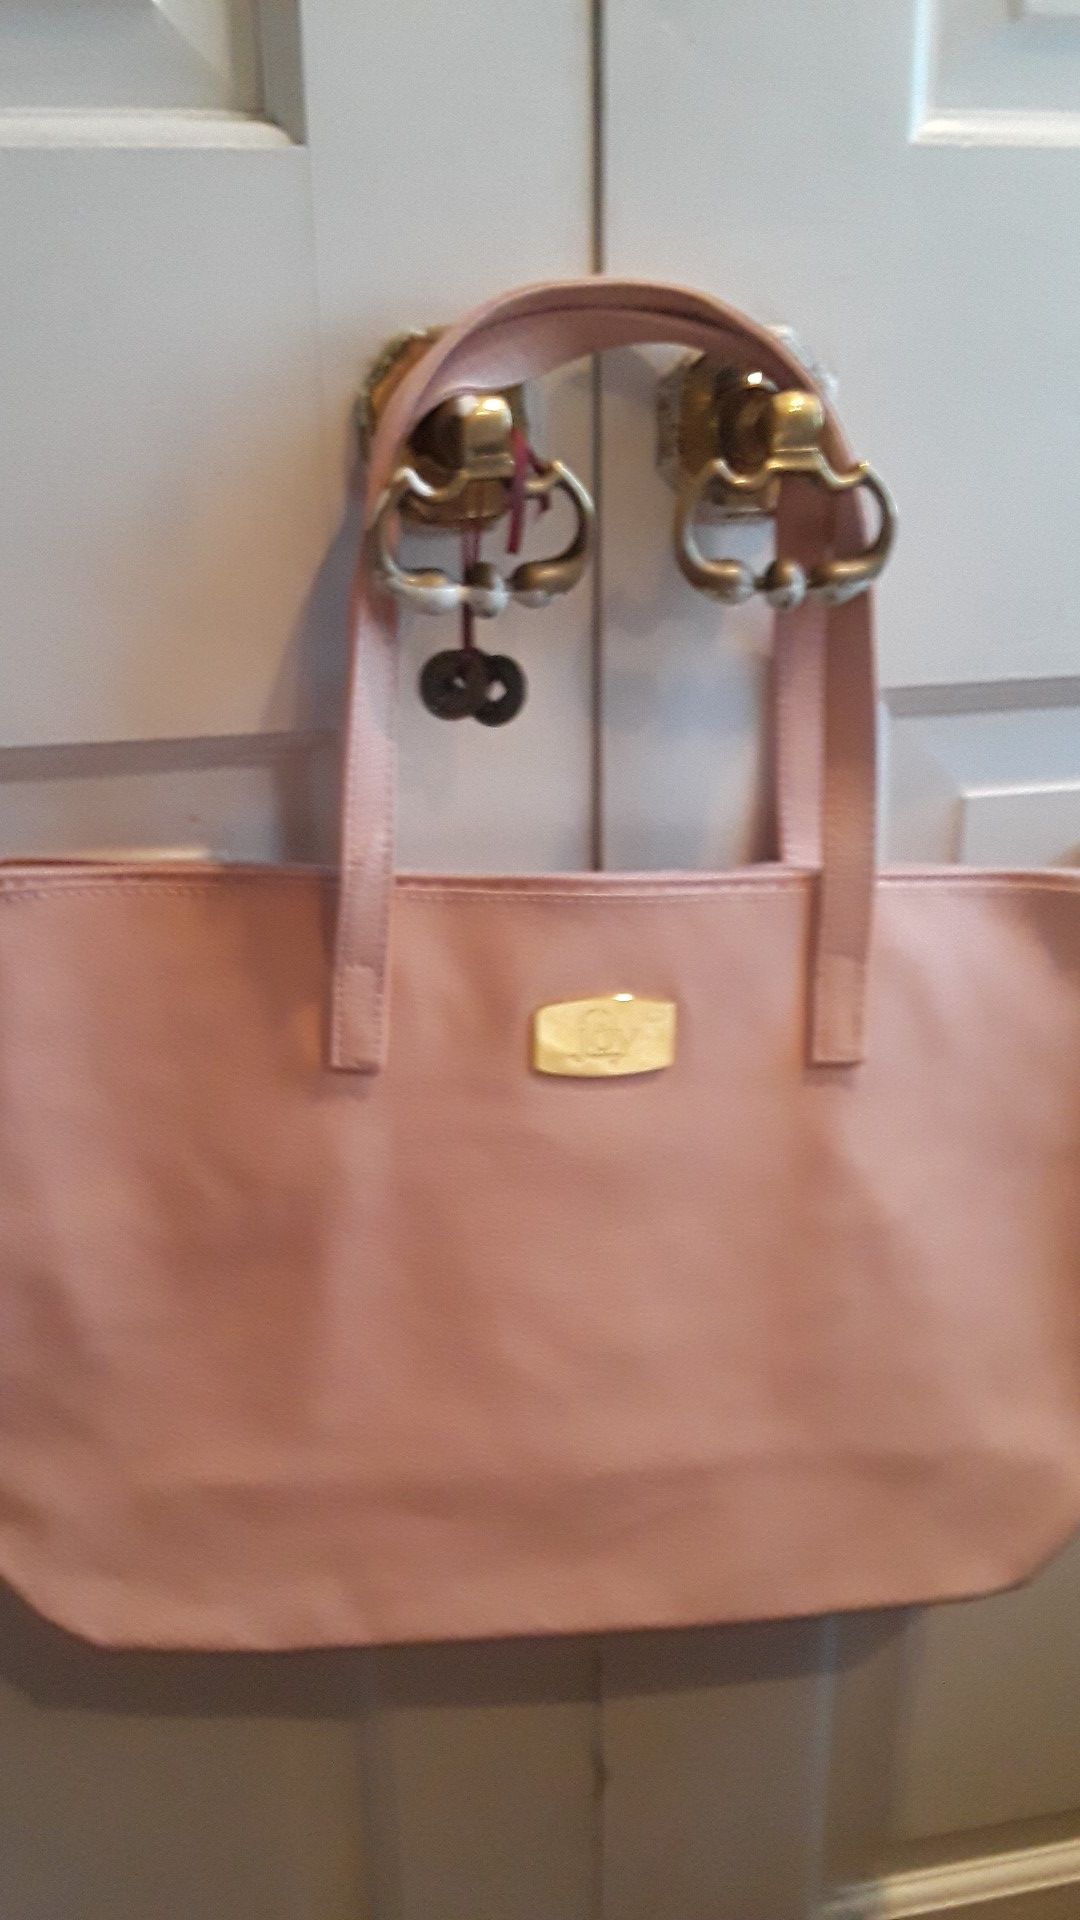 New!! Gorgeous leather tote bag. Never used. New.